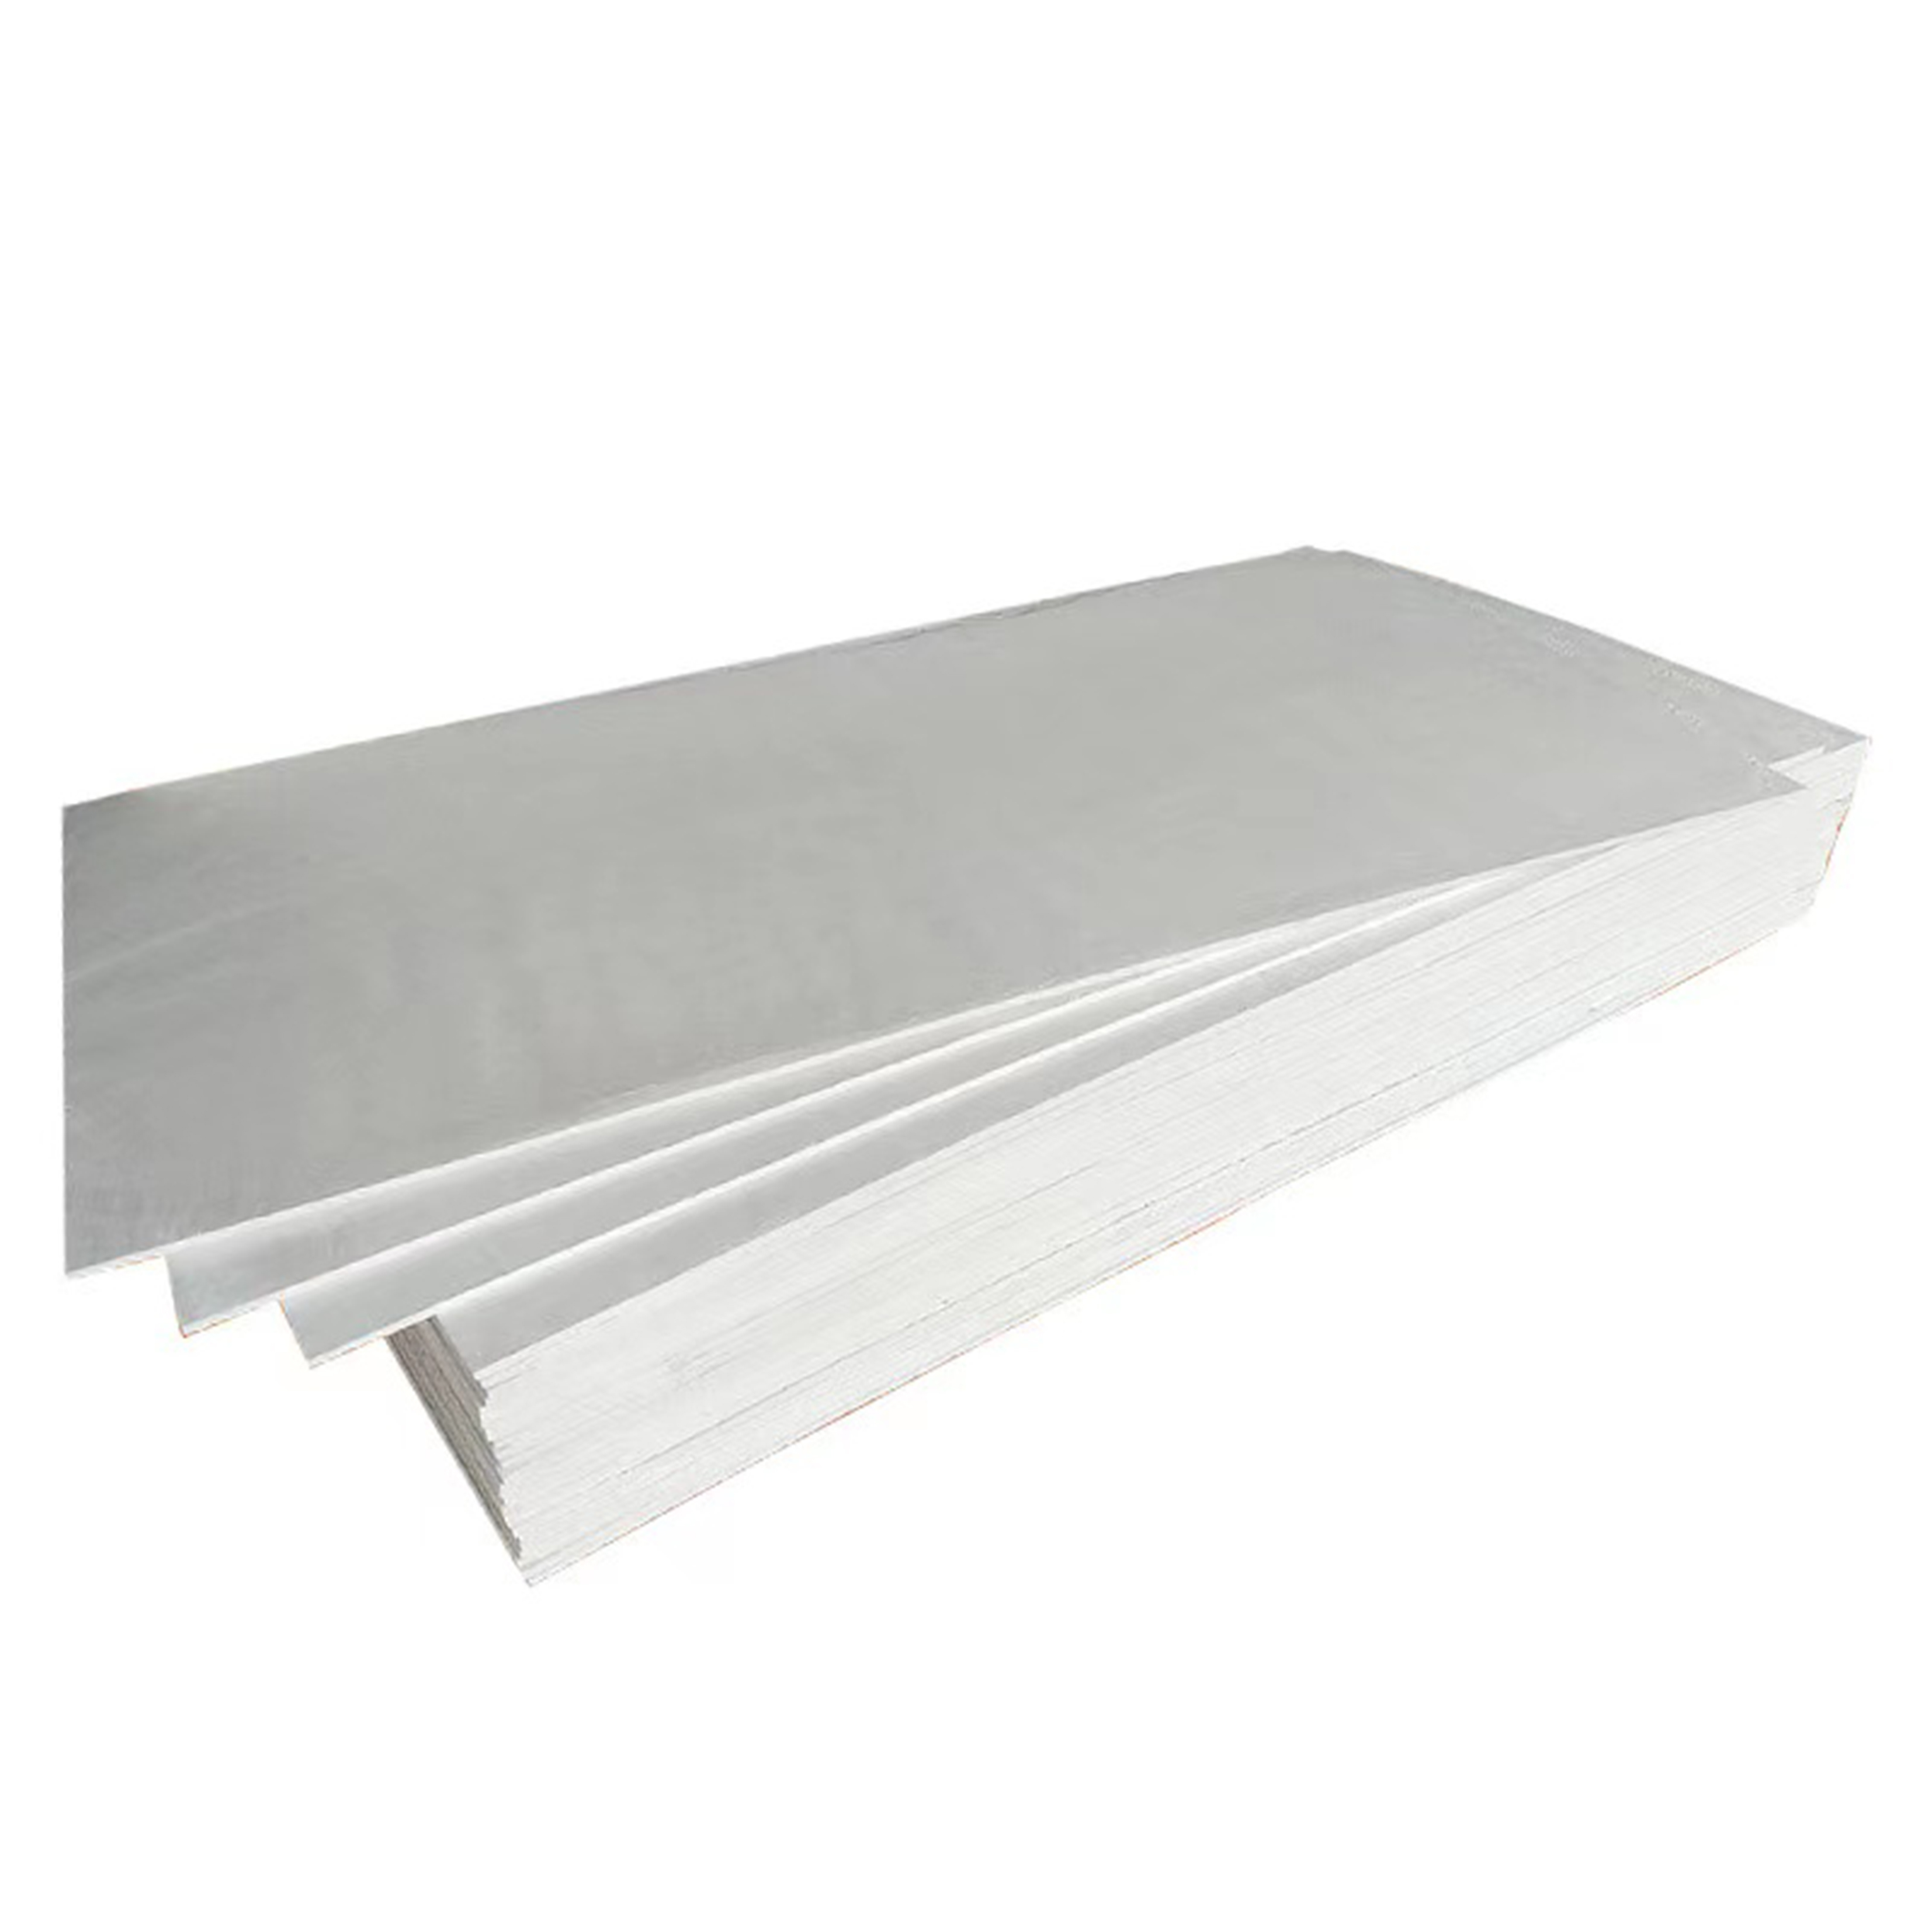 Specializing in the manufacture and sale of lightweight and high-strength fireproof boards